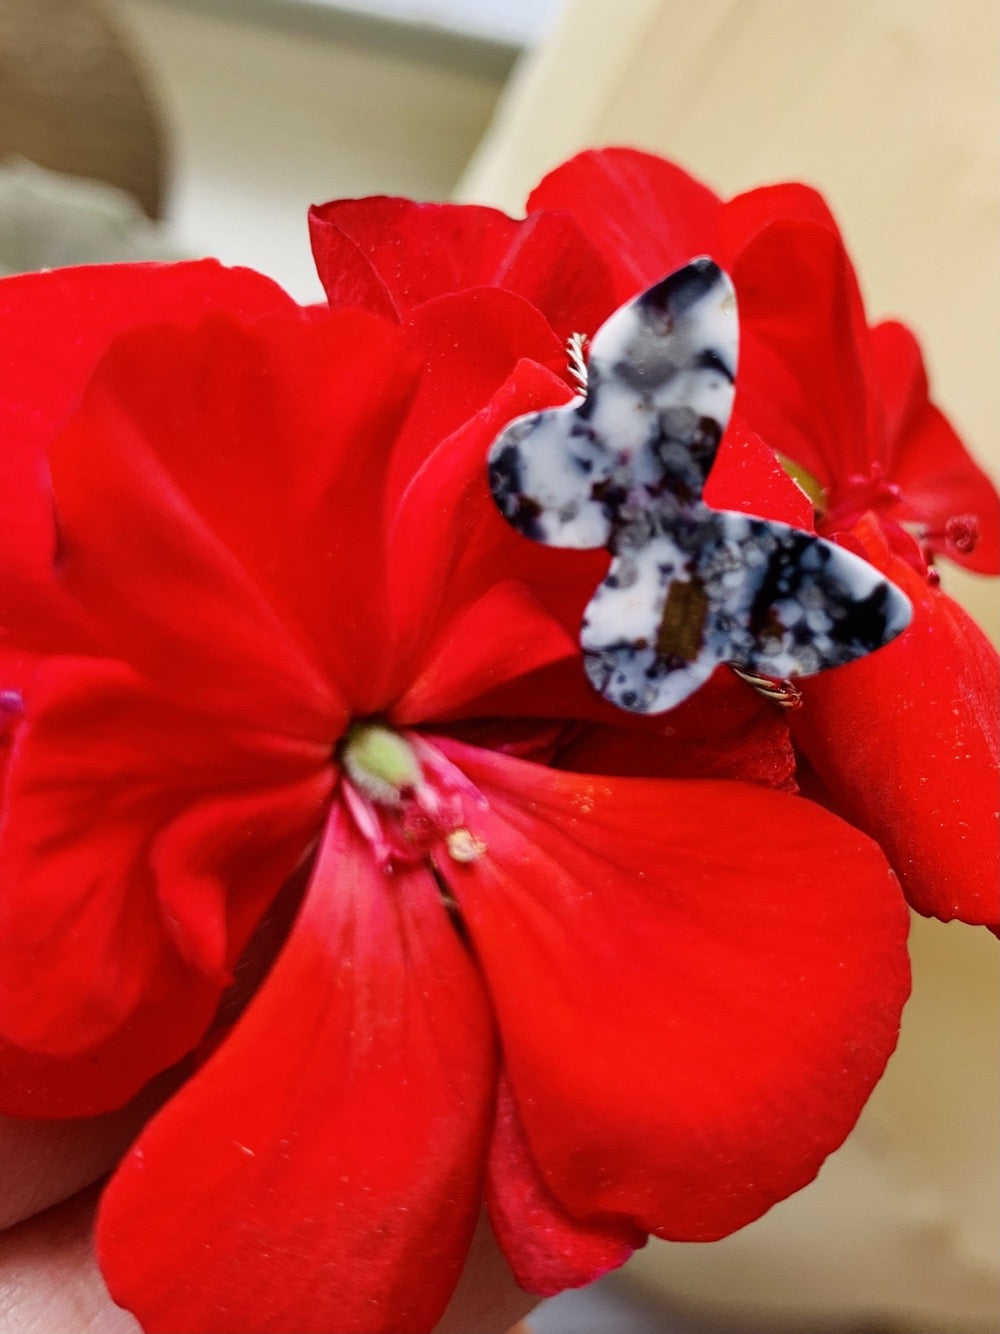 On a bright red geranium is a butterfly shaped ring. It is cast from recycled 3D prints in black, white and silver plant based filaments. They have a speckled look like granite.